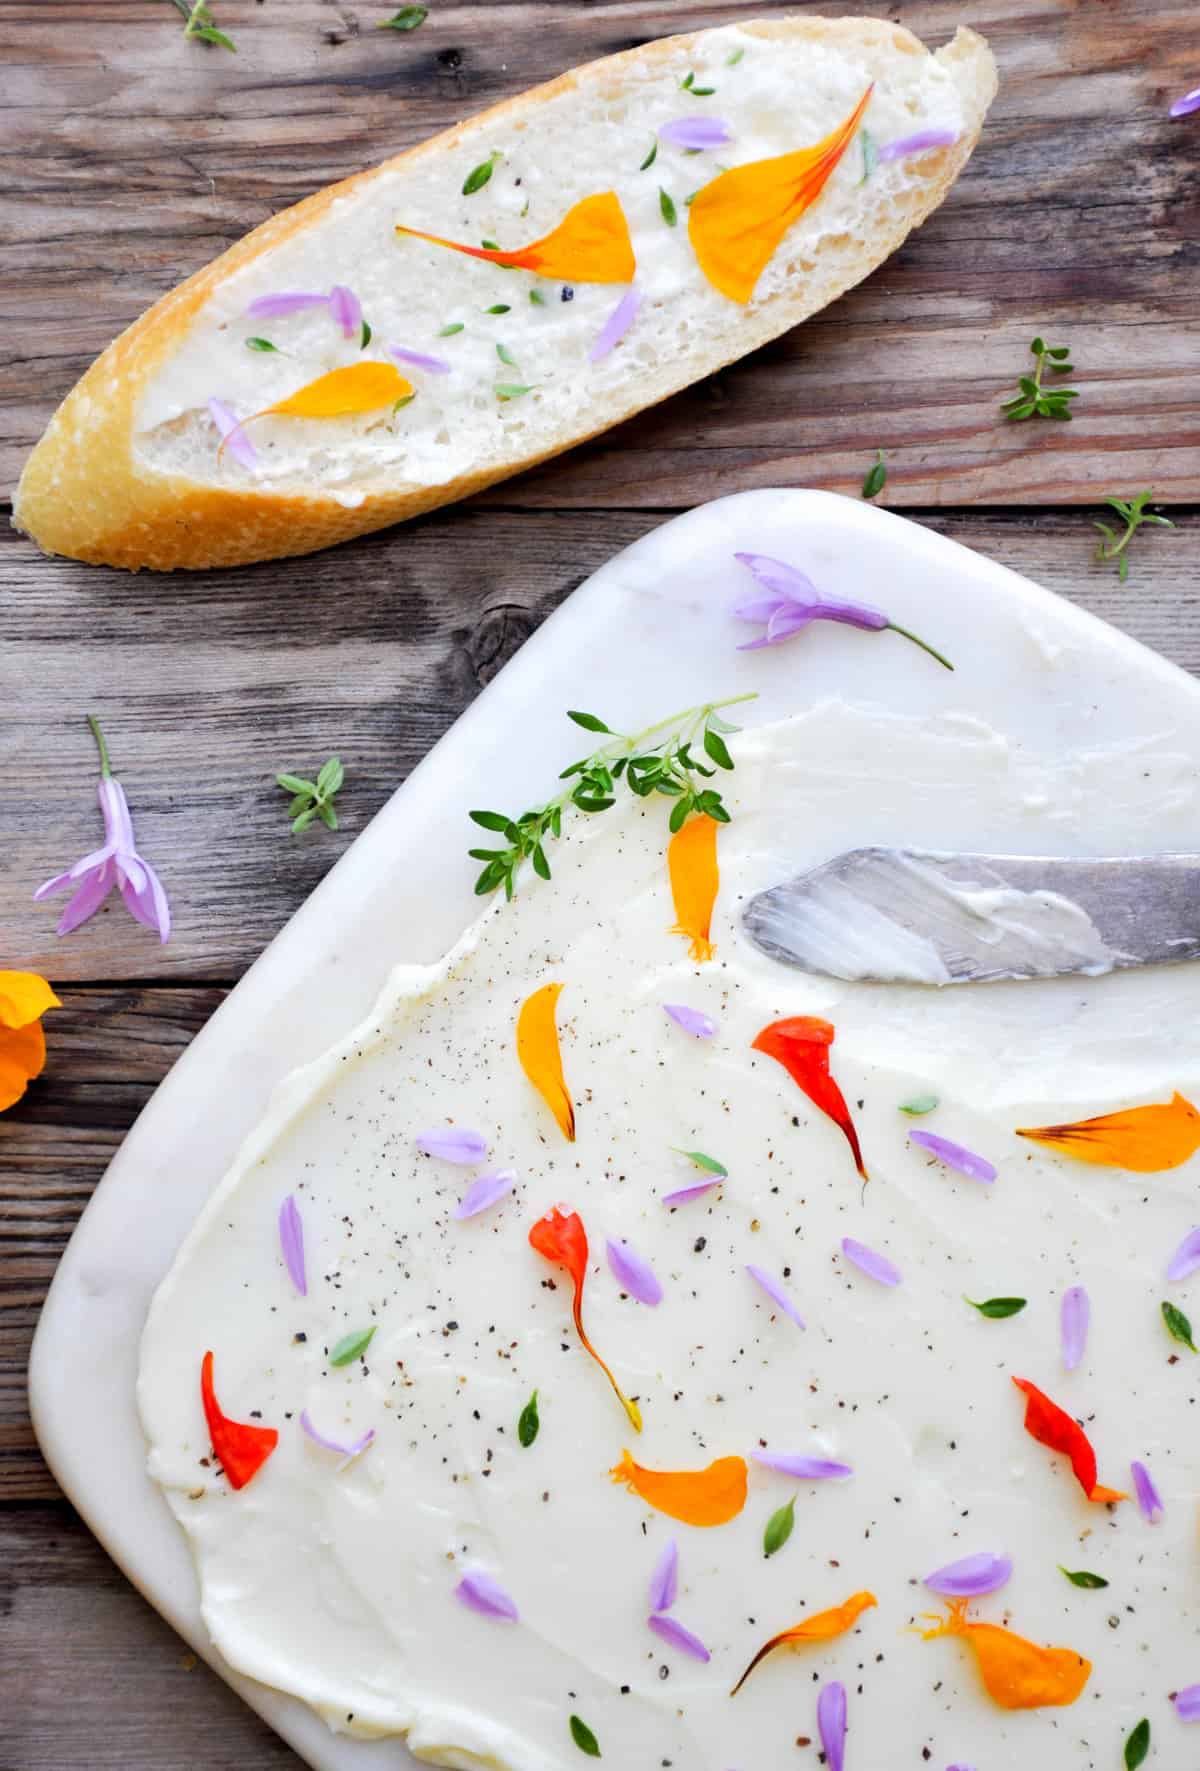 floral butter using edible flowers and herbs